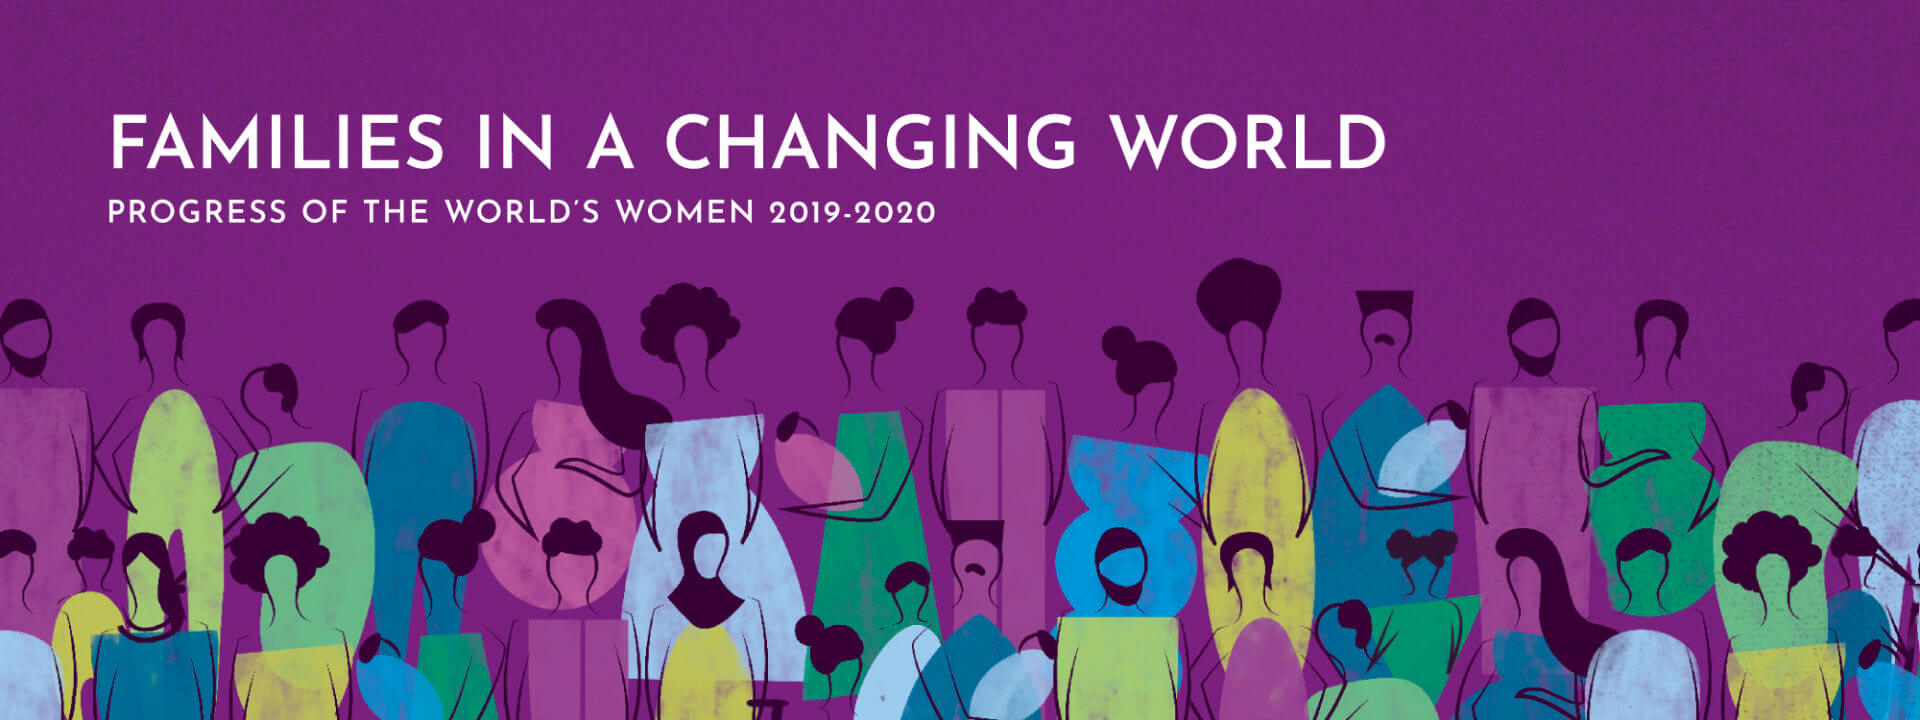 Progress of the World’s Women 2019–2020: Families in a changing world